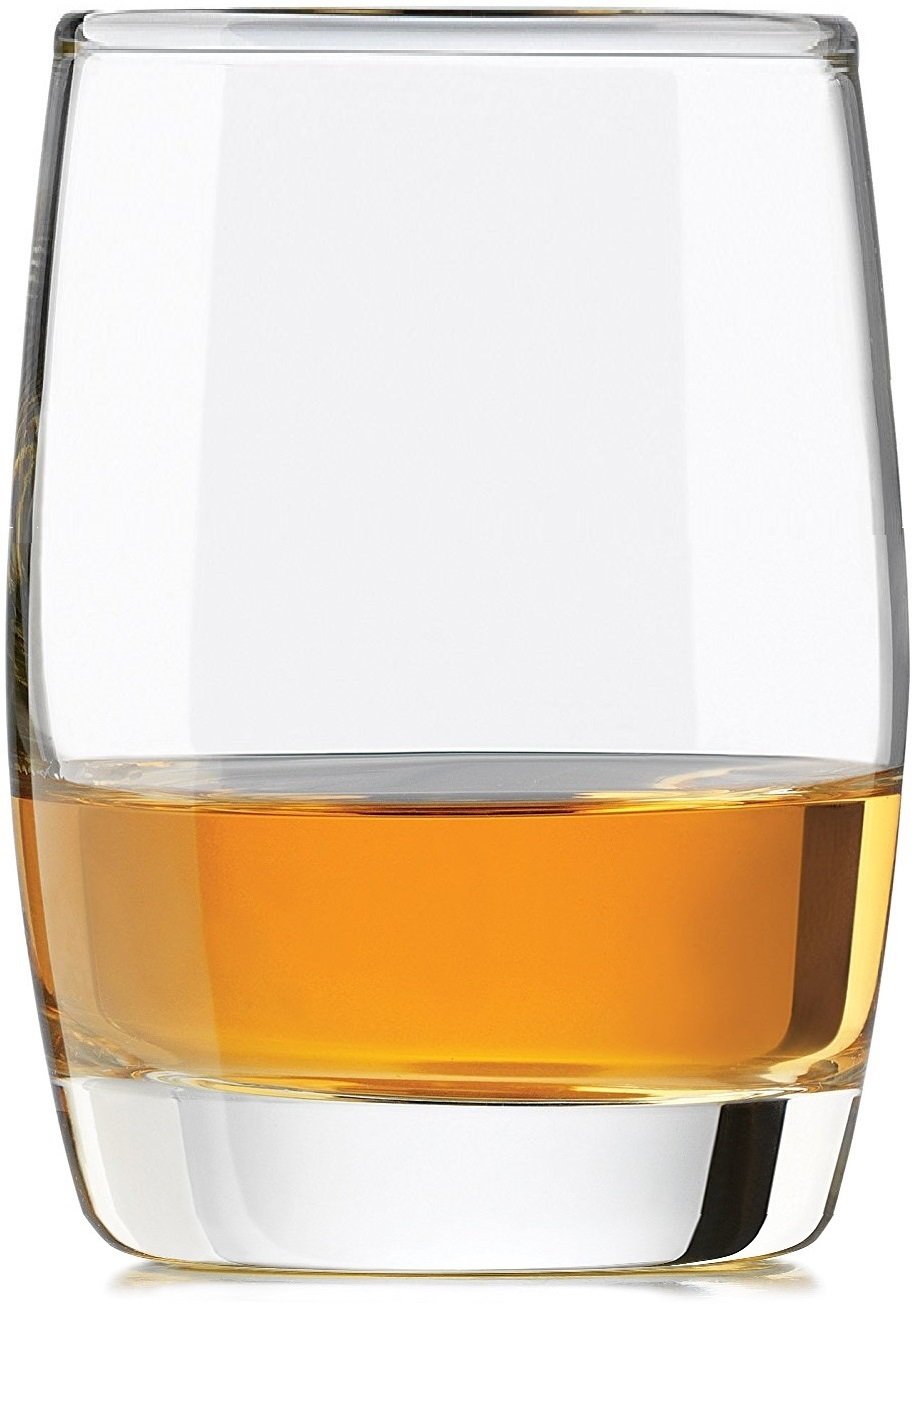 Circleware Heavy Base Scotch Whiskey Glass Drinking Glasses, Set of 4, Entertainment Dinnerware Glassware for Water, Juice, Beer & Bar Liquor Dining Decor Beverage Cups Gifts, 12 oz, Glen Rocks